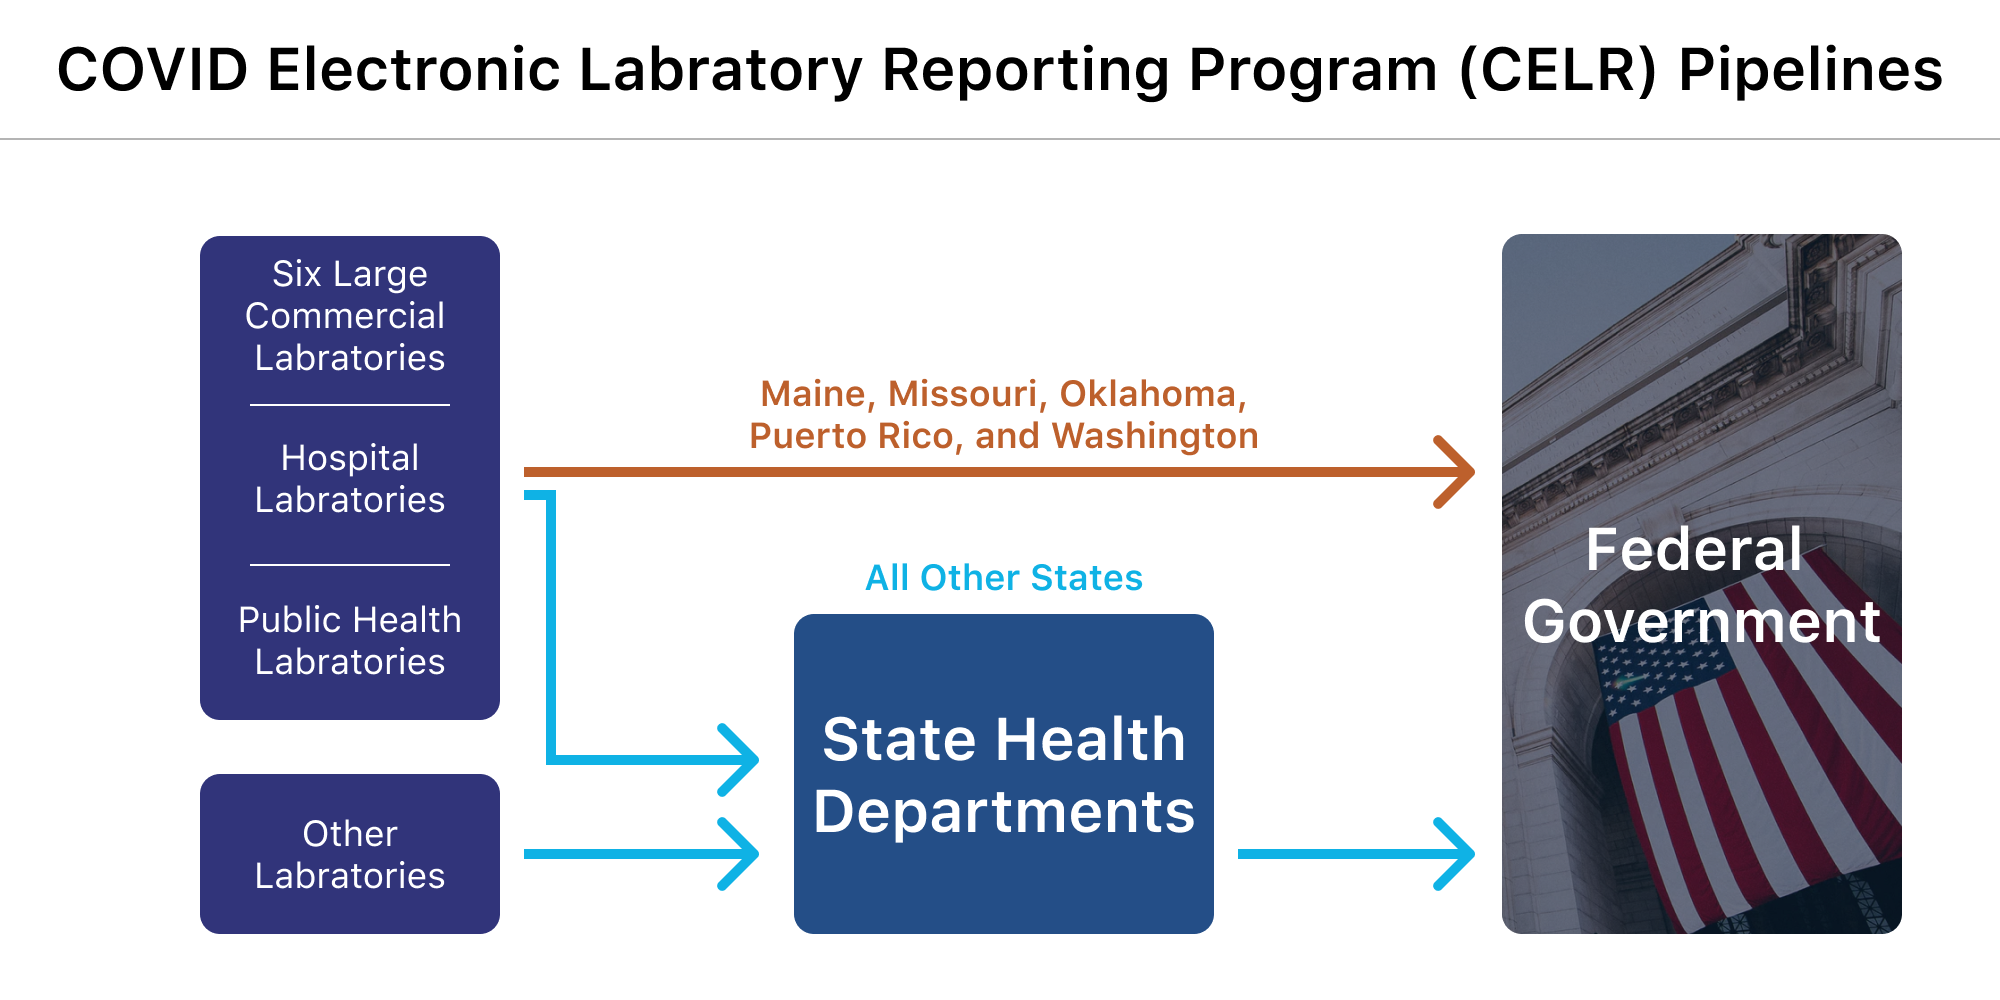 A flowchart shows the path of testing data from laboratories to the federal government. In five states—Maine, Missouri, Oklahoma, Puerto Rico, and Washington—the data flows directly from a portion of laboratories to the federal government. In all other states, the data goes from laboratories to the state health department before making its way to the federal government.